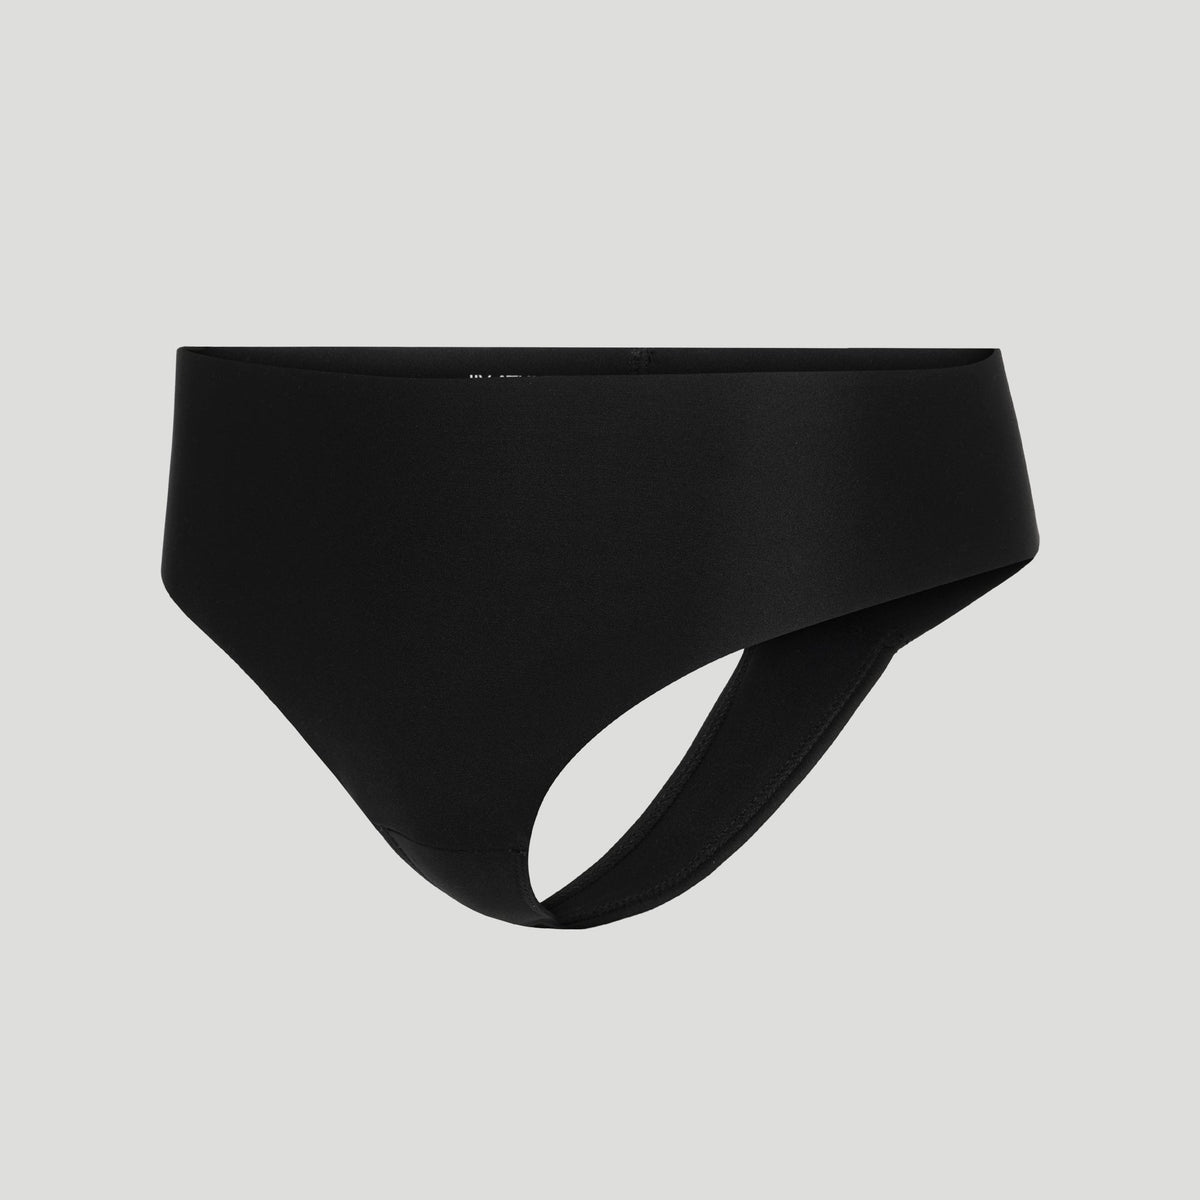 The Camel Proof High Rise Thong